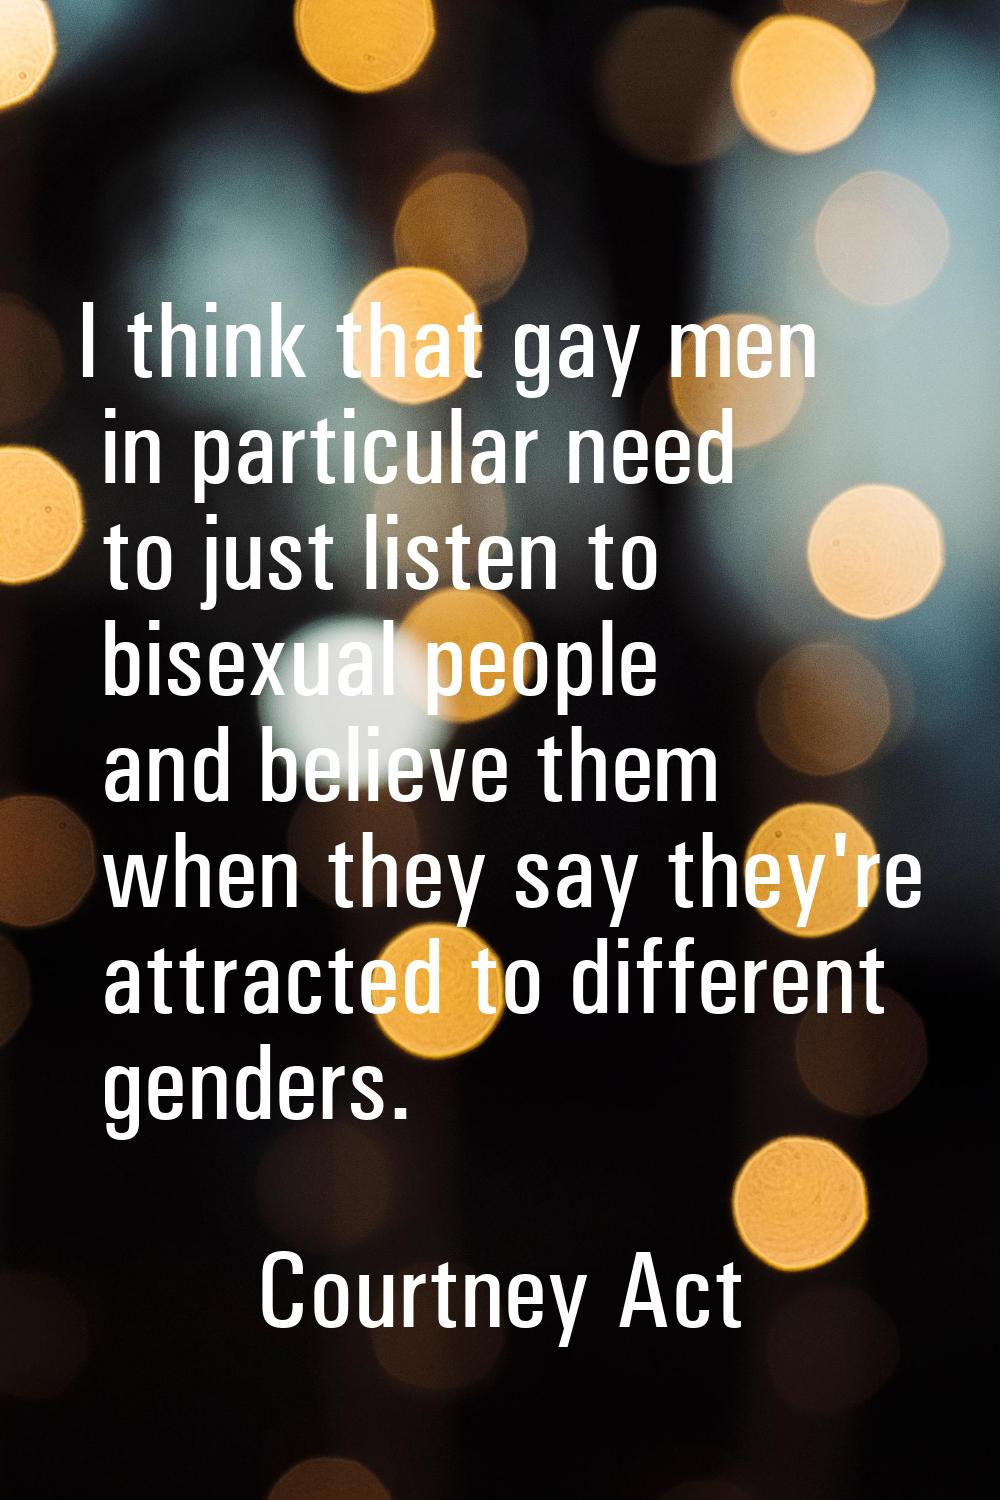 I think that gay men in particular need to just listen to bisexual people and believe them when the